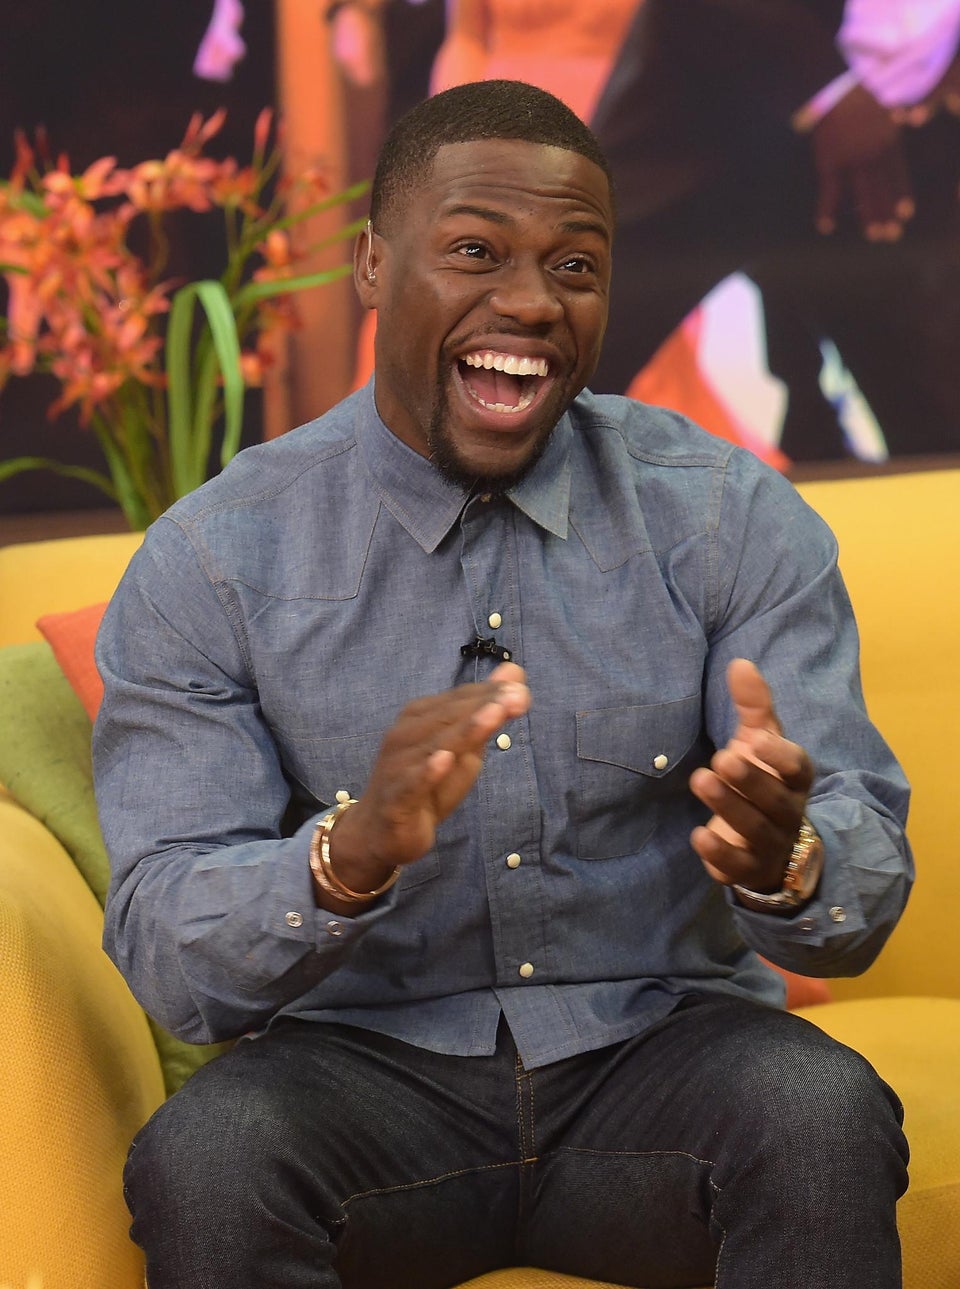 The State of California Announces Kevin Hart Day